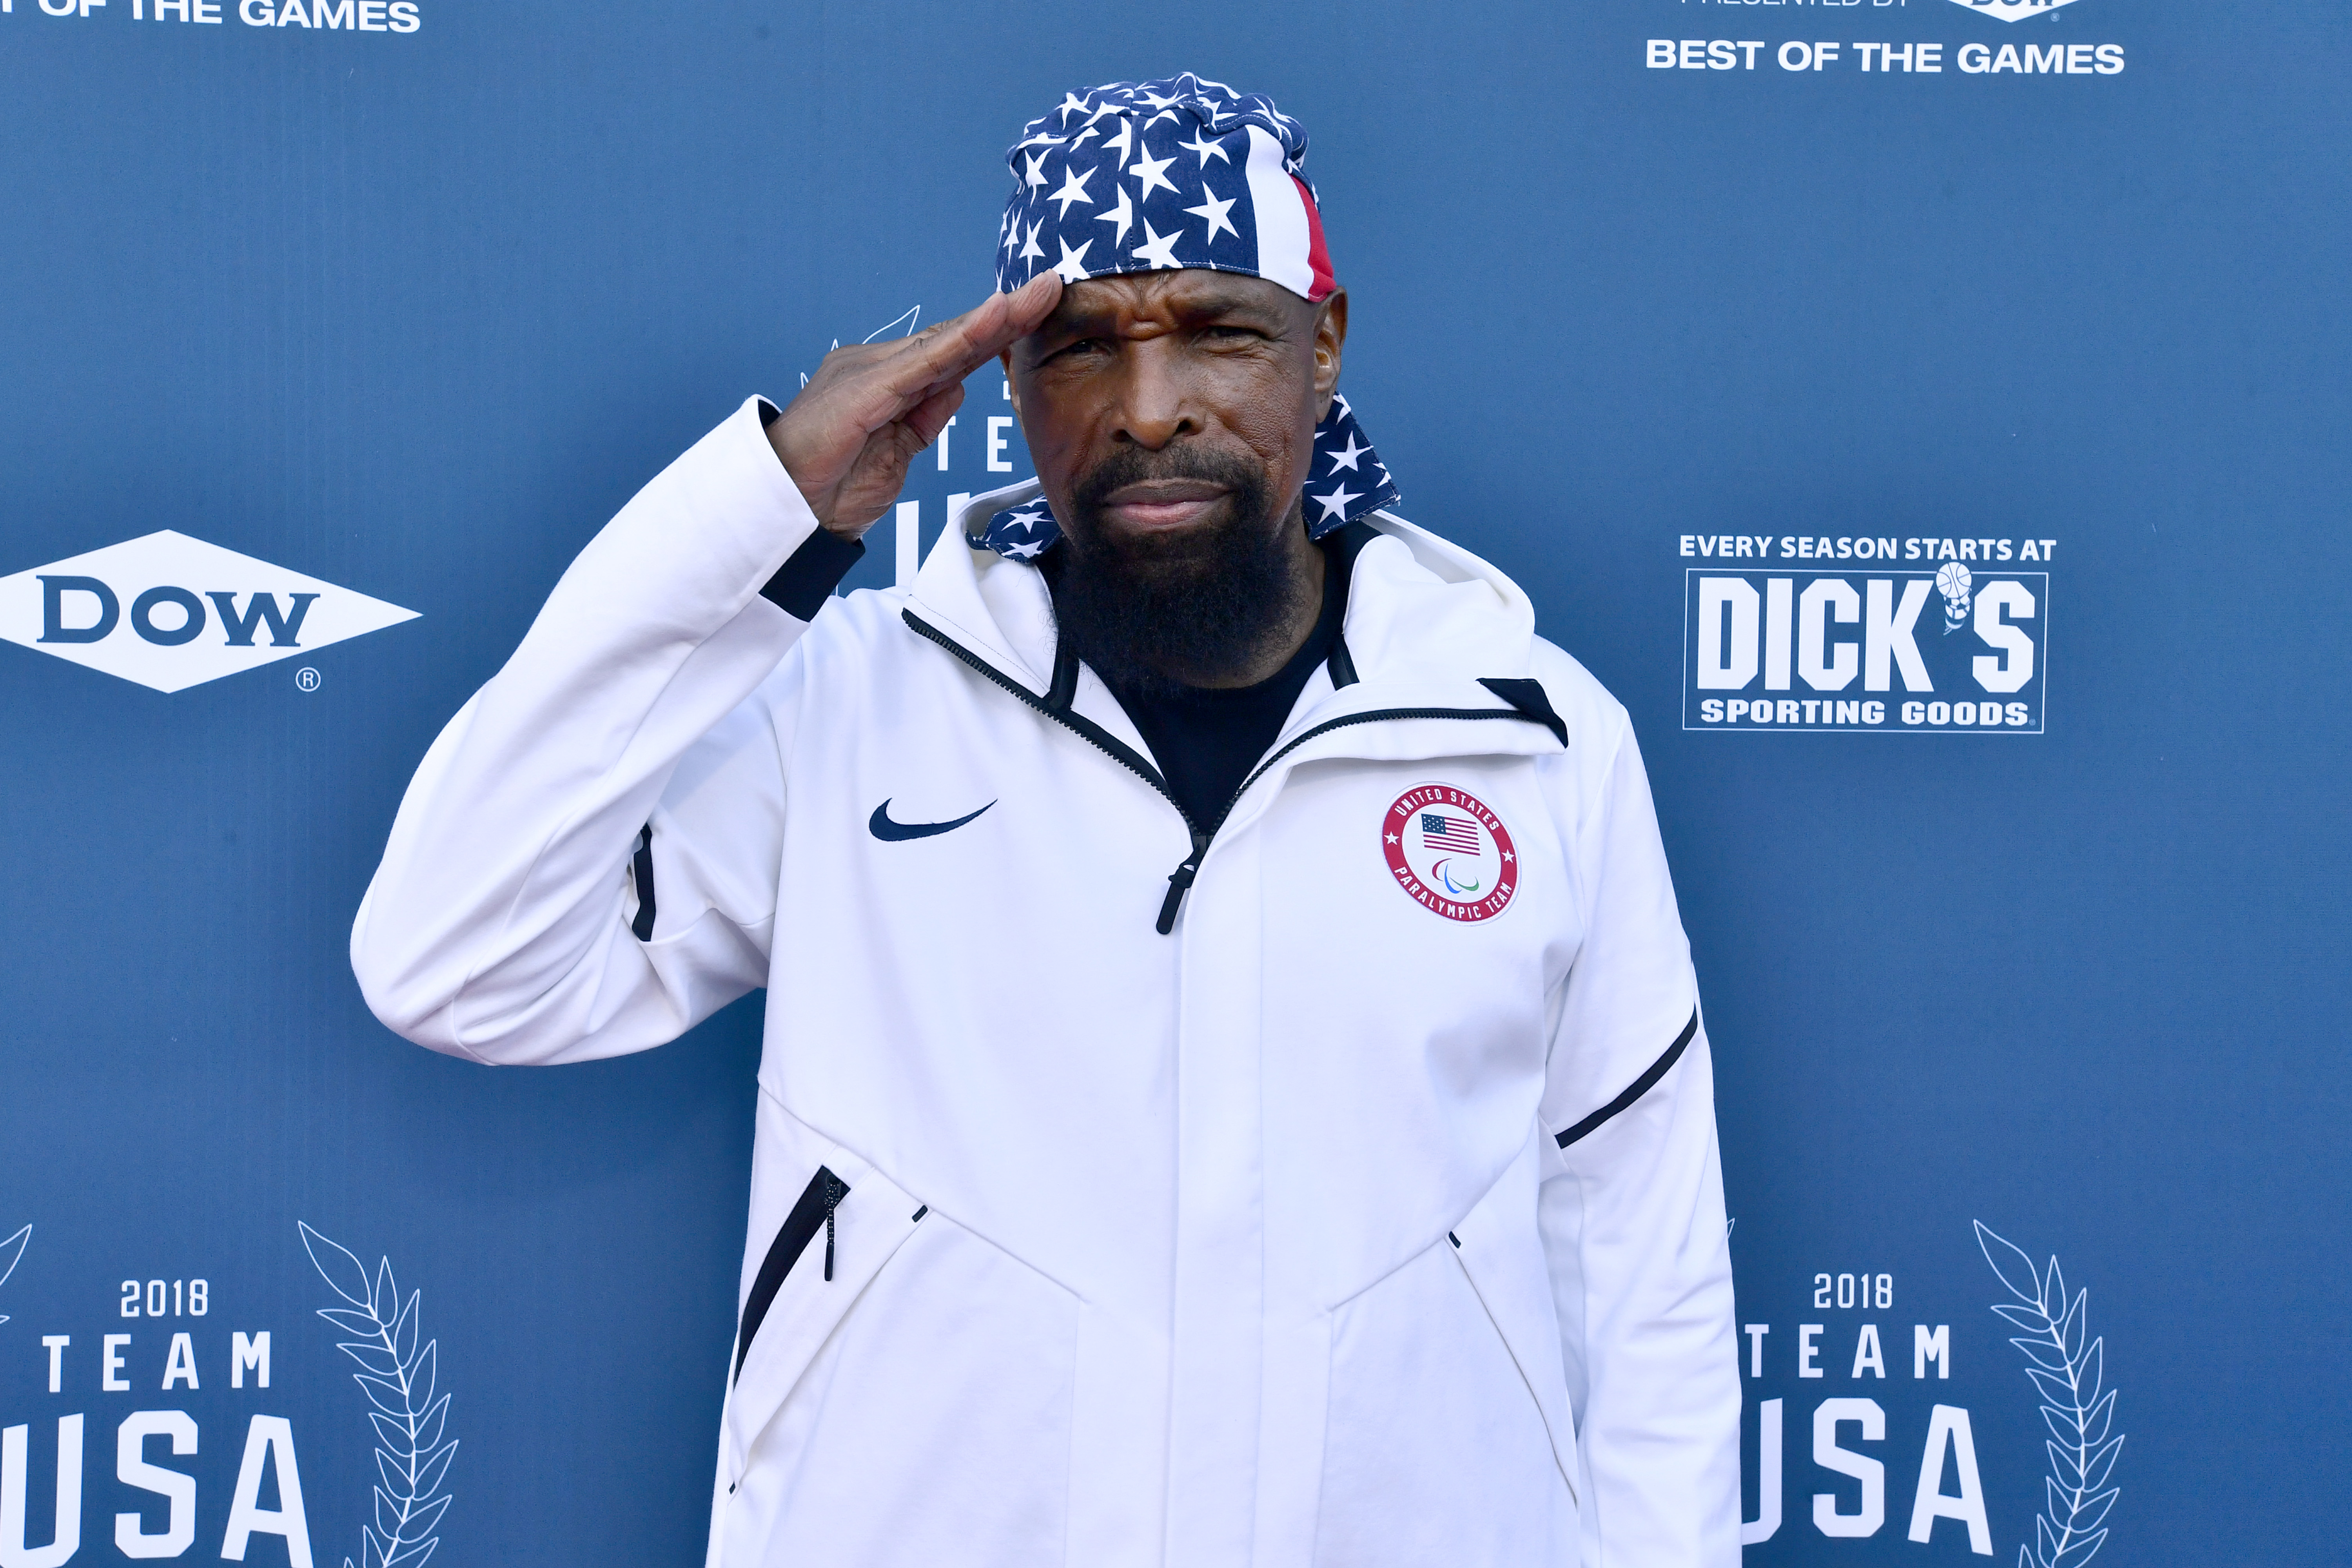 Mr. T at the Team USA Awards on April 26, 2018, in Washington, DC. | Source: Getty Images